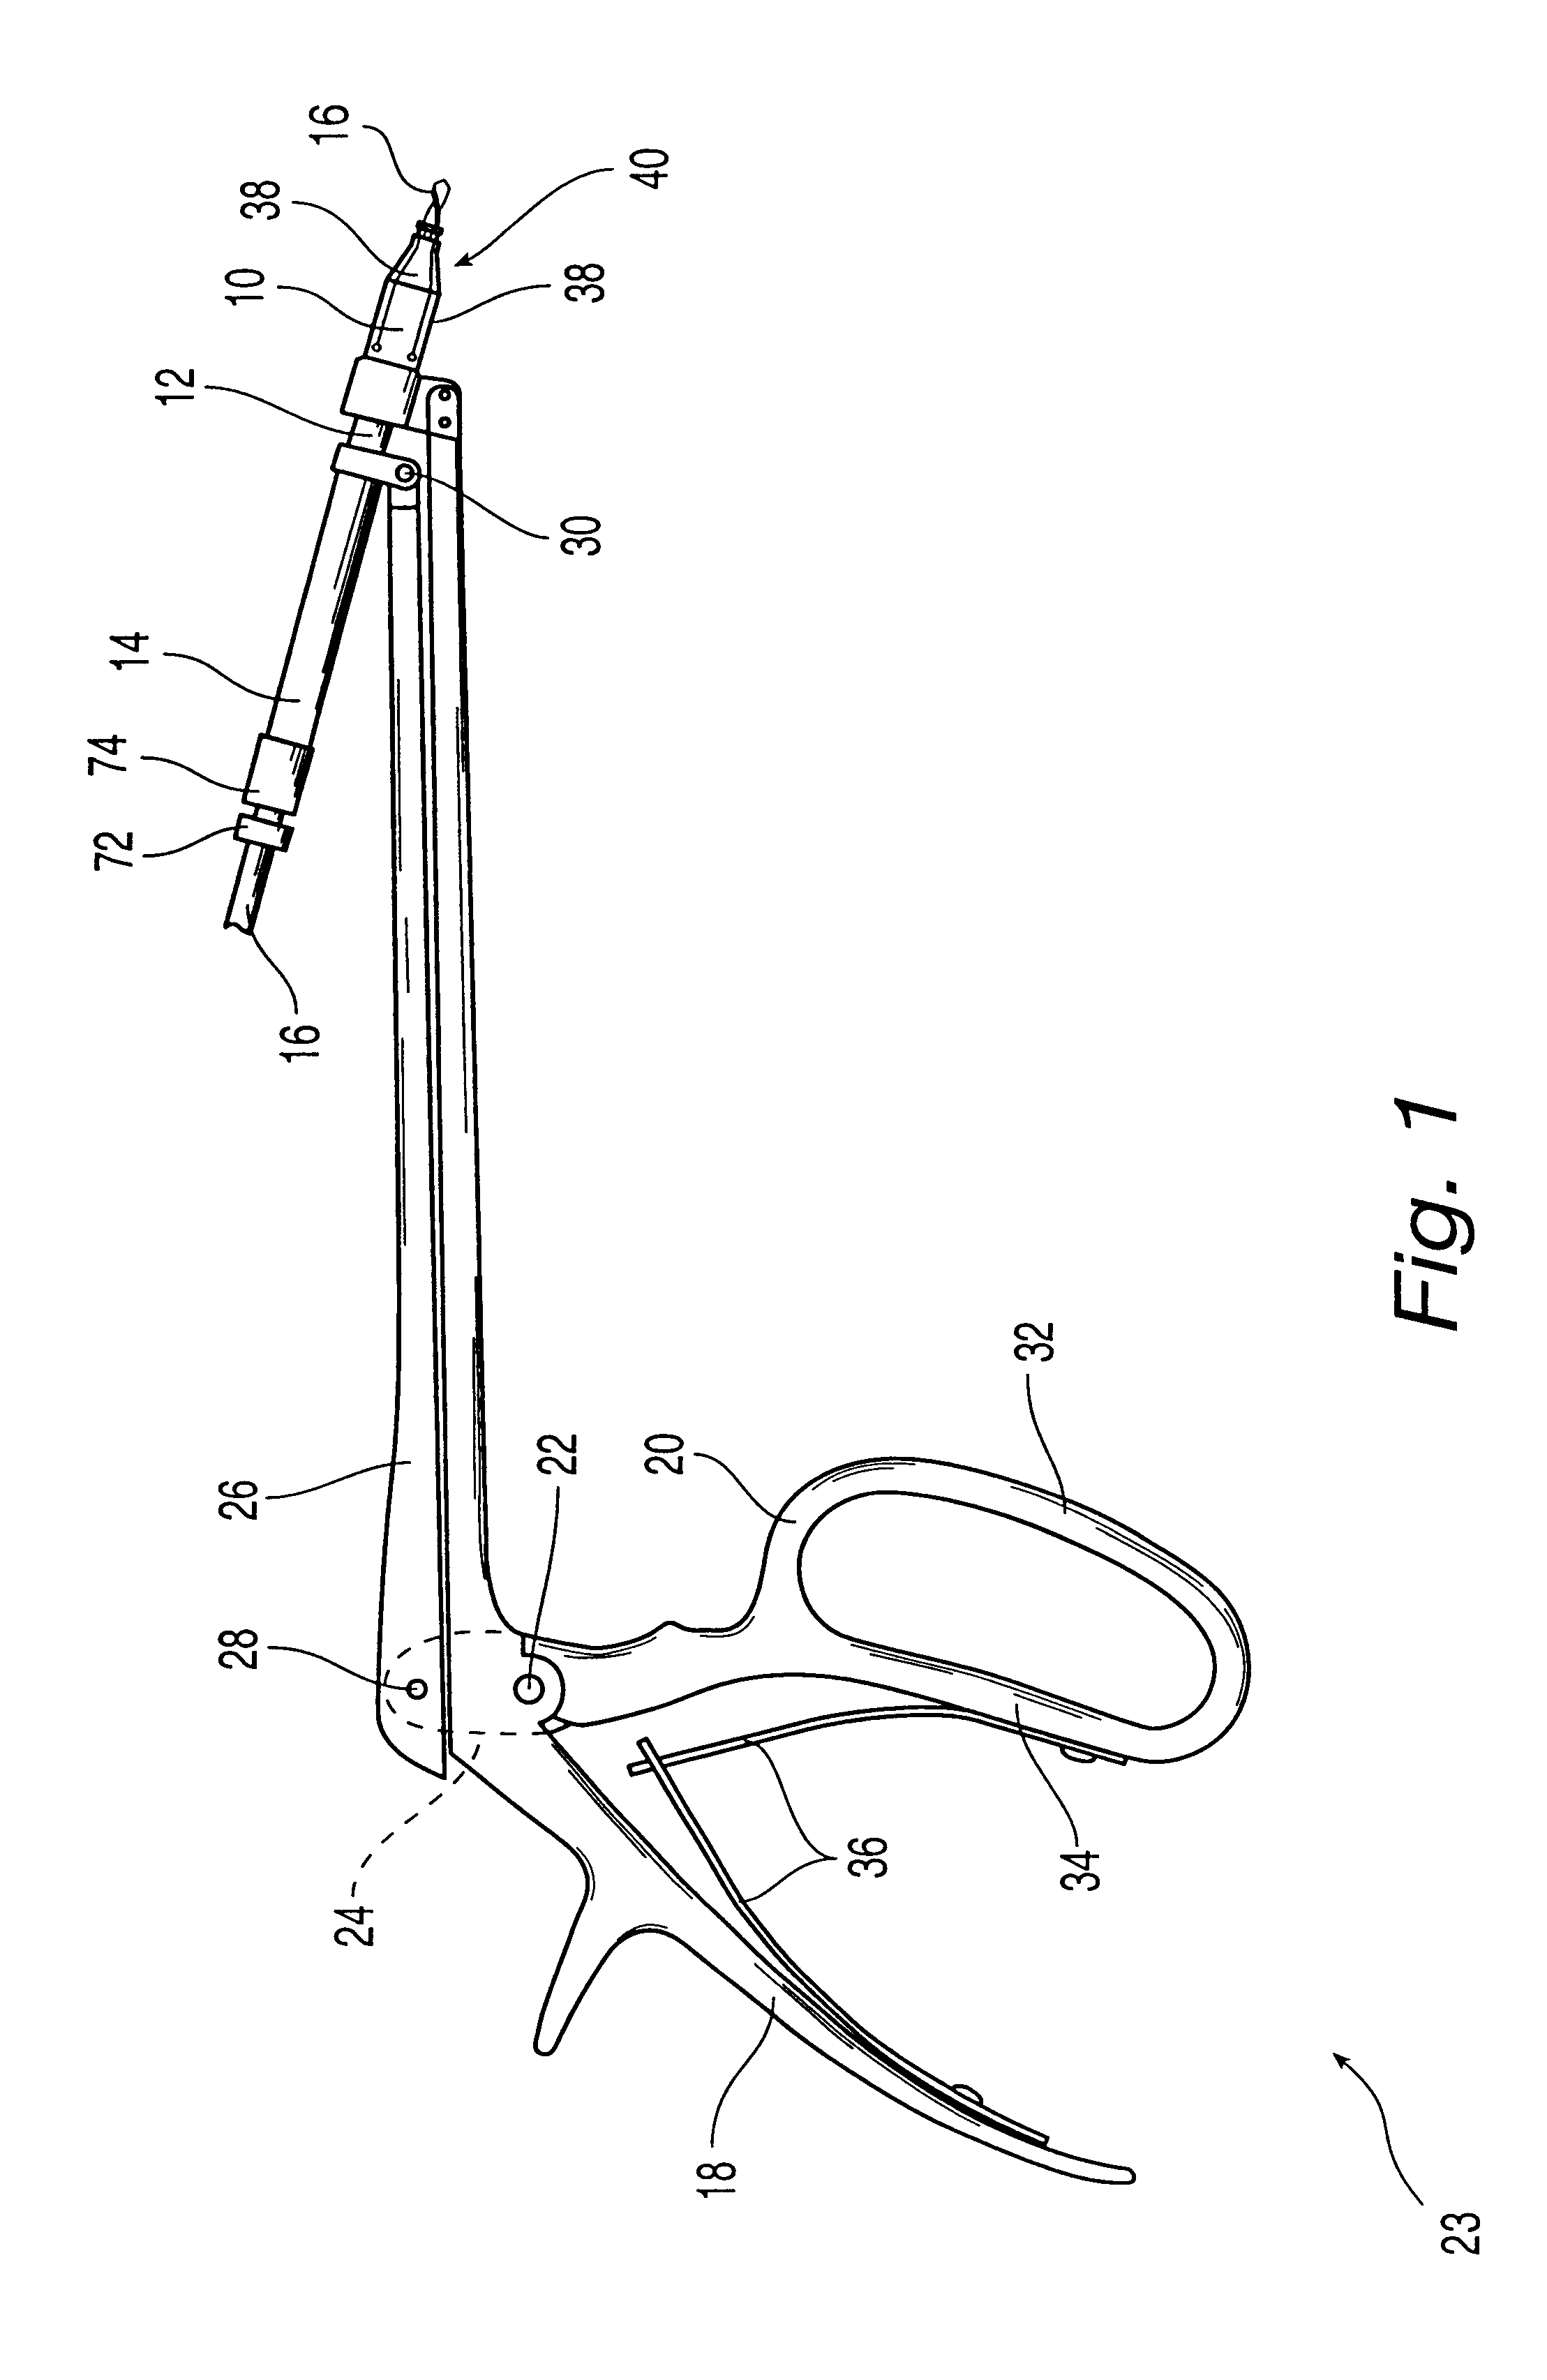 Freely separable surgical drill guide and plate